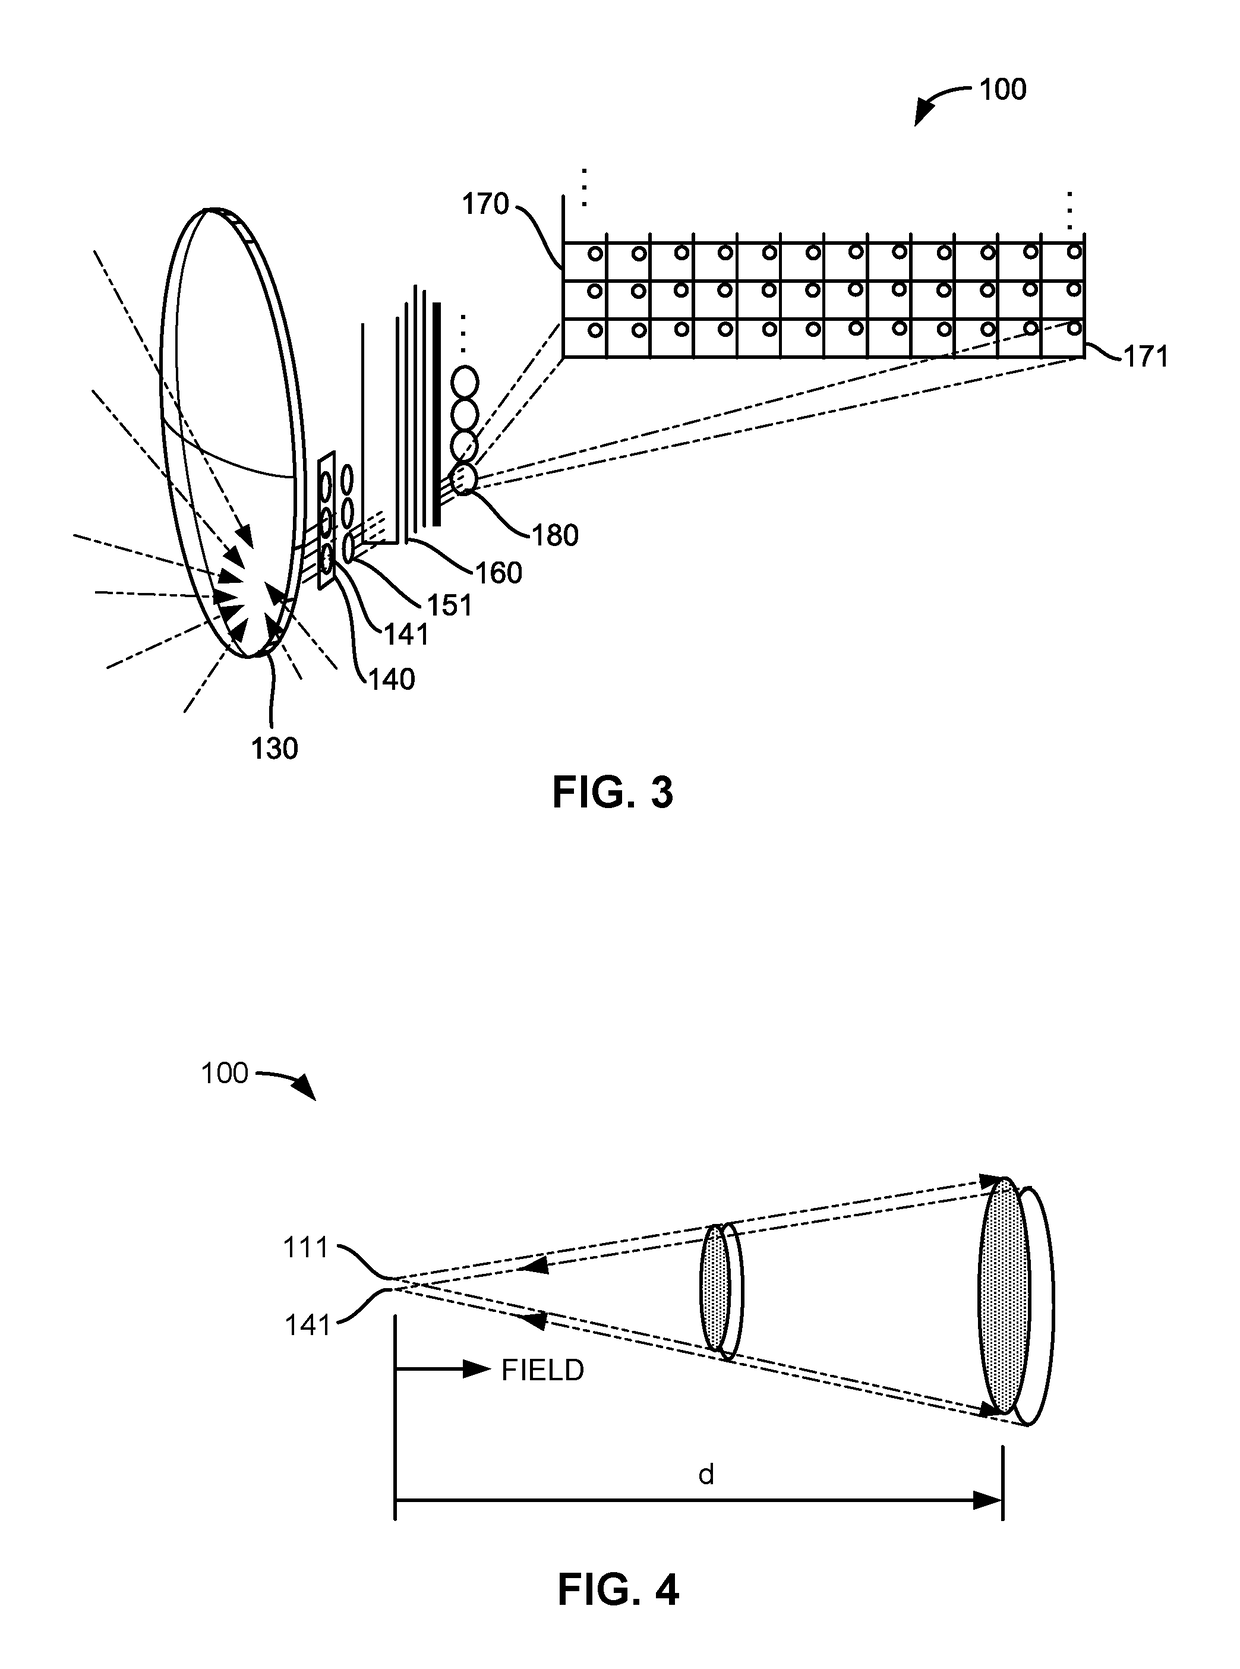 Optical system for collecting distance information within a field